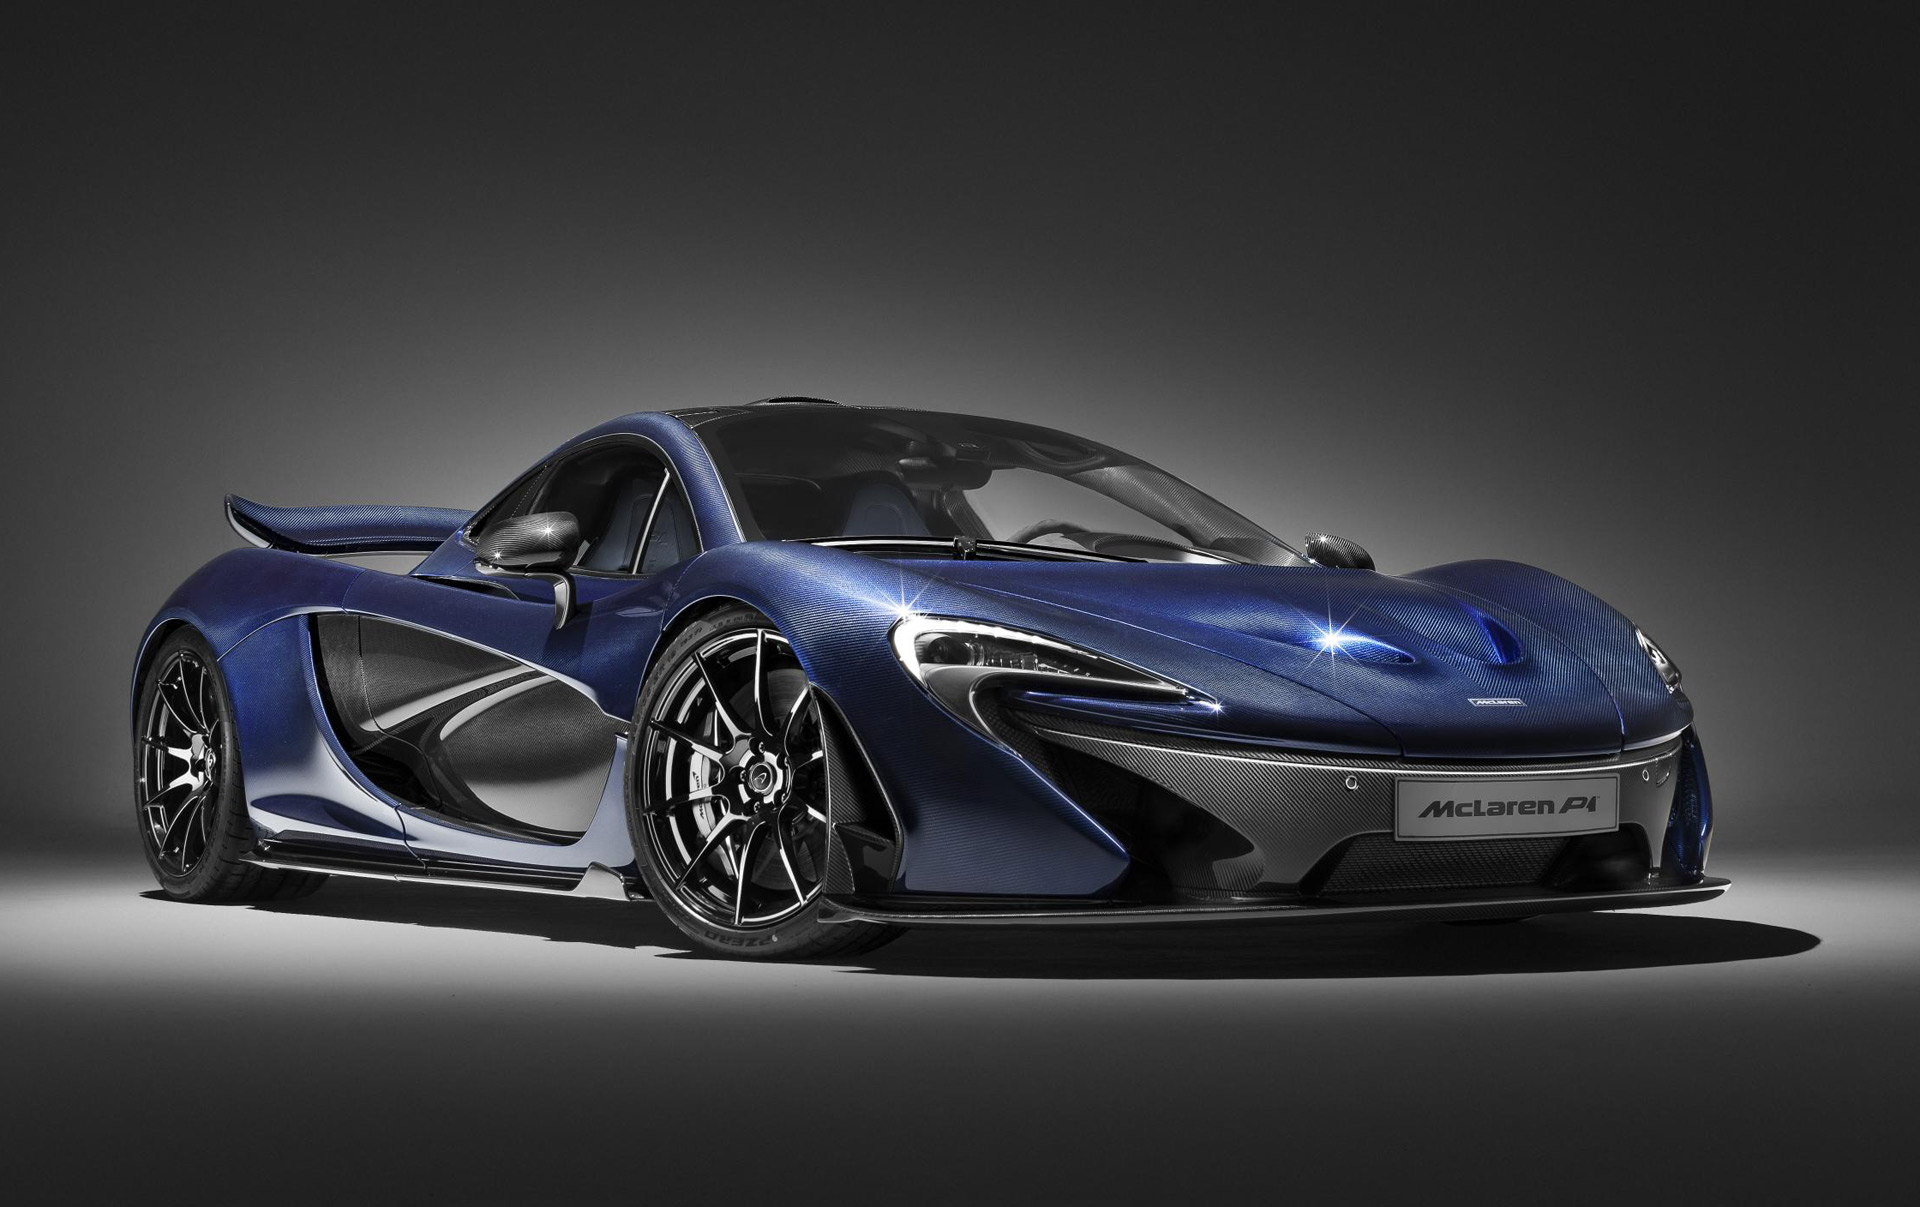 McLaren P1 successor reportedly due in 2026 with V-8 hybrid Auto Recent